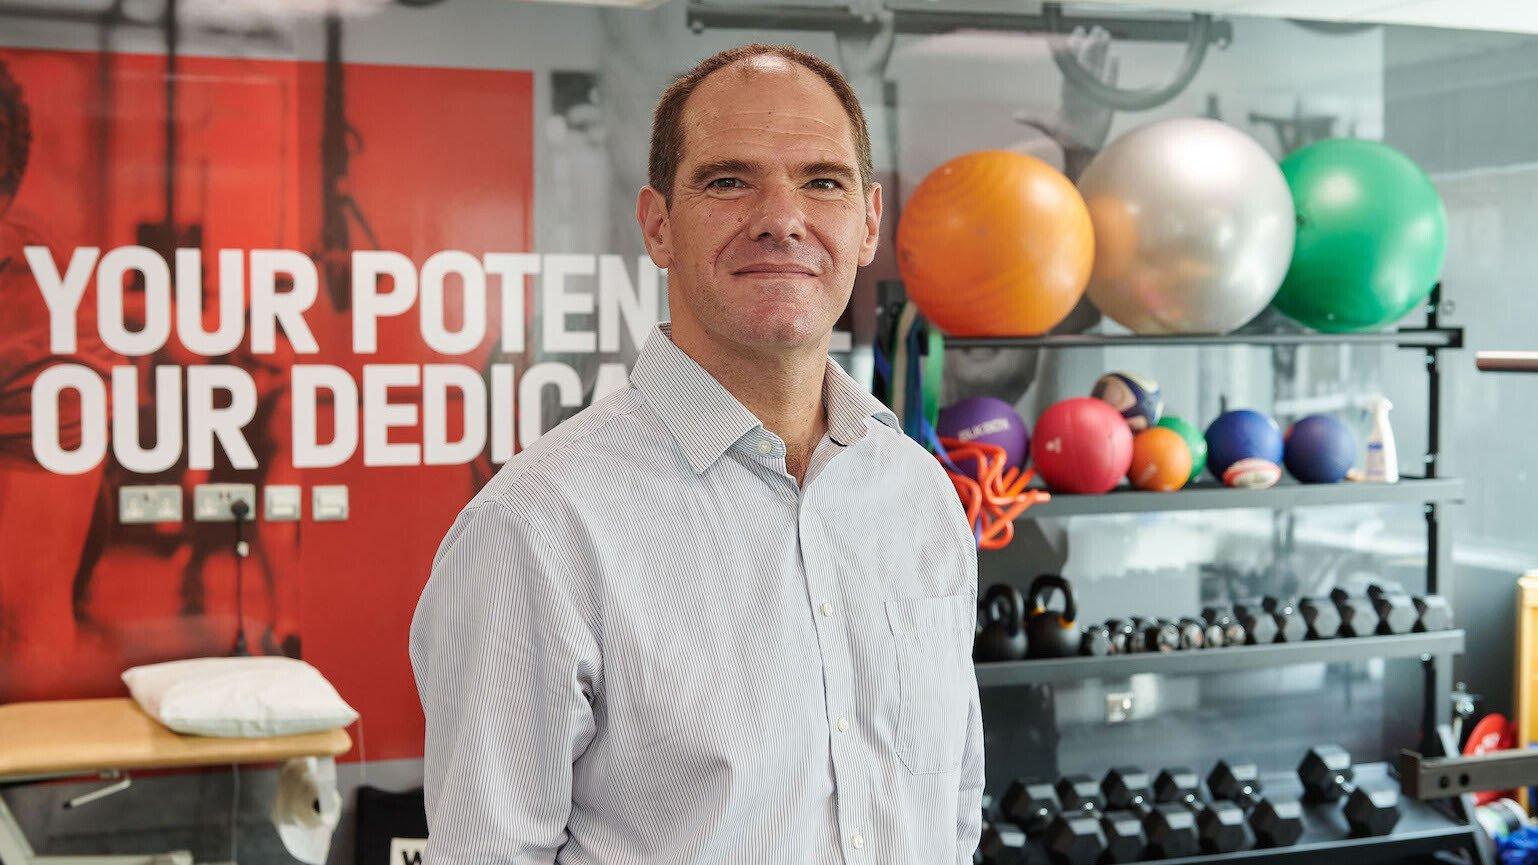 Professor Jonathan Roiser smiles at the camera. He is in a gym, standing in front of a shelf of exercise balls and weights.